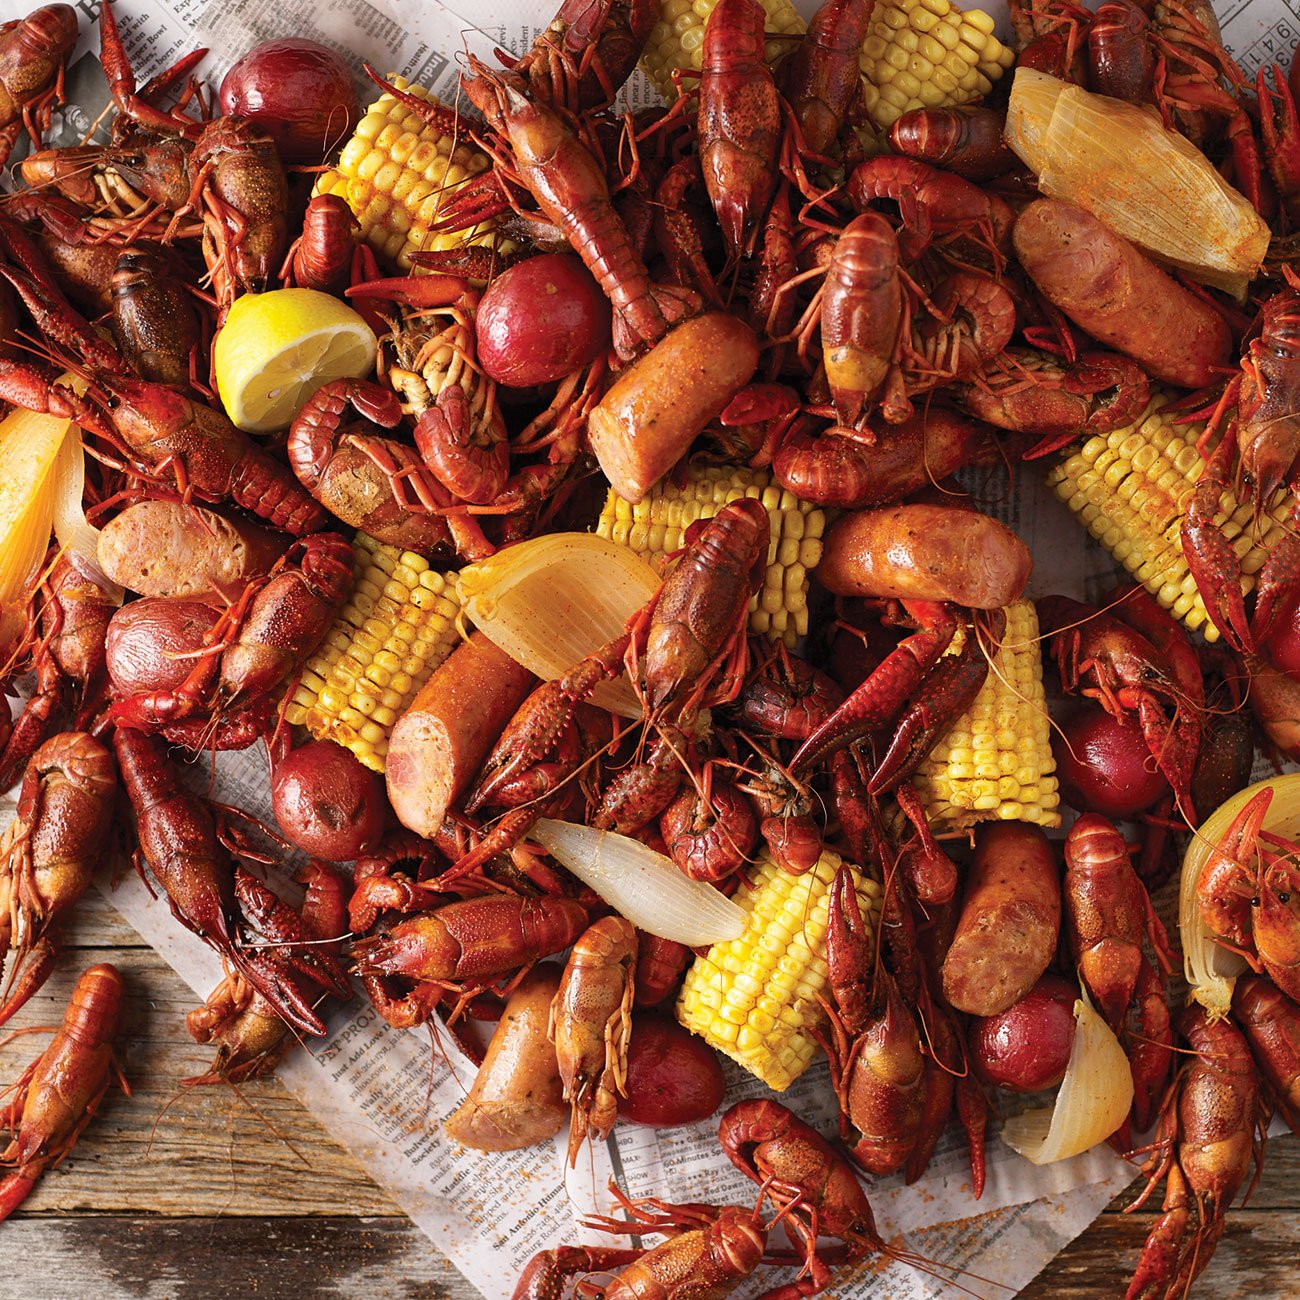 the-20-best-places-to-get-boiled-crawfish-in-new-orleans-where-y-at